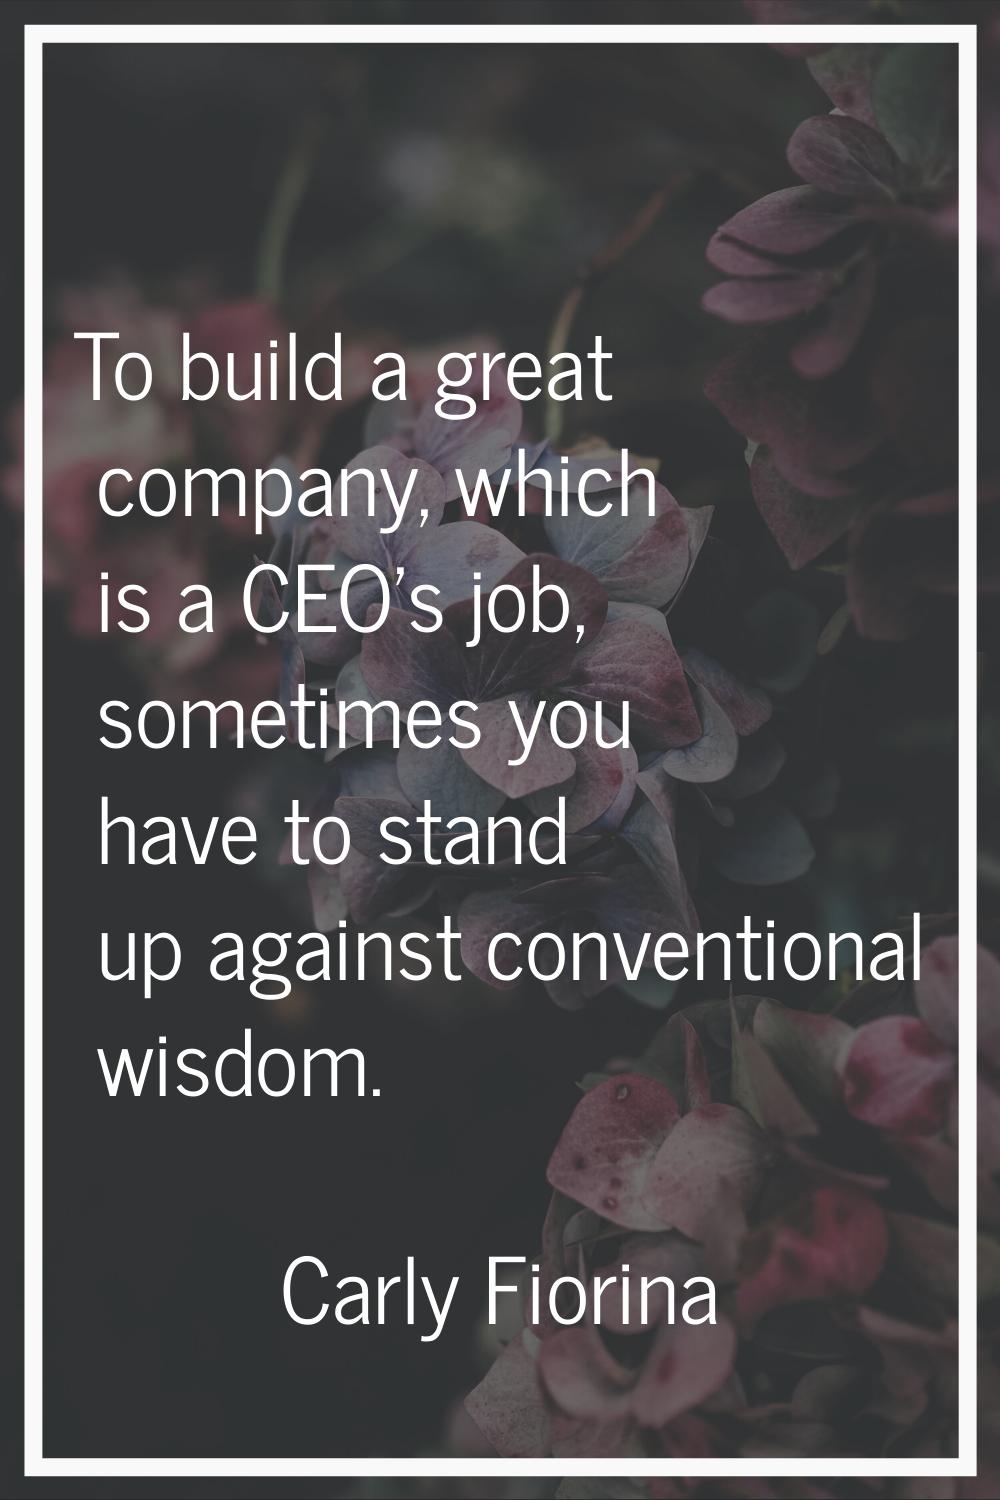 To build a great company, which is a CEO's job, sometimes you have to stand up against conventional